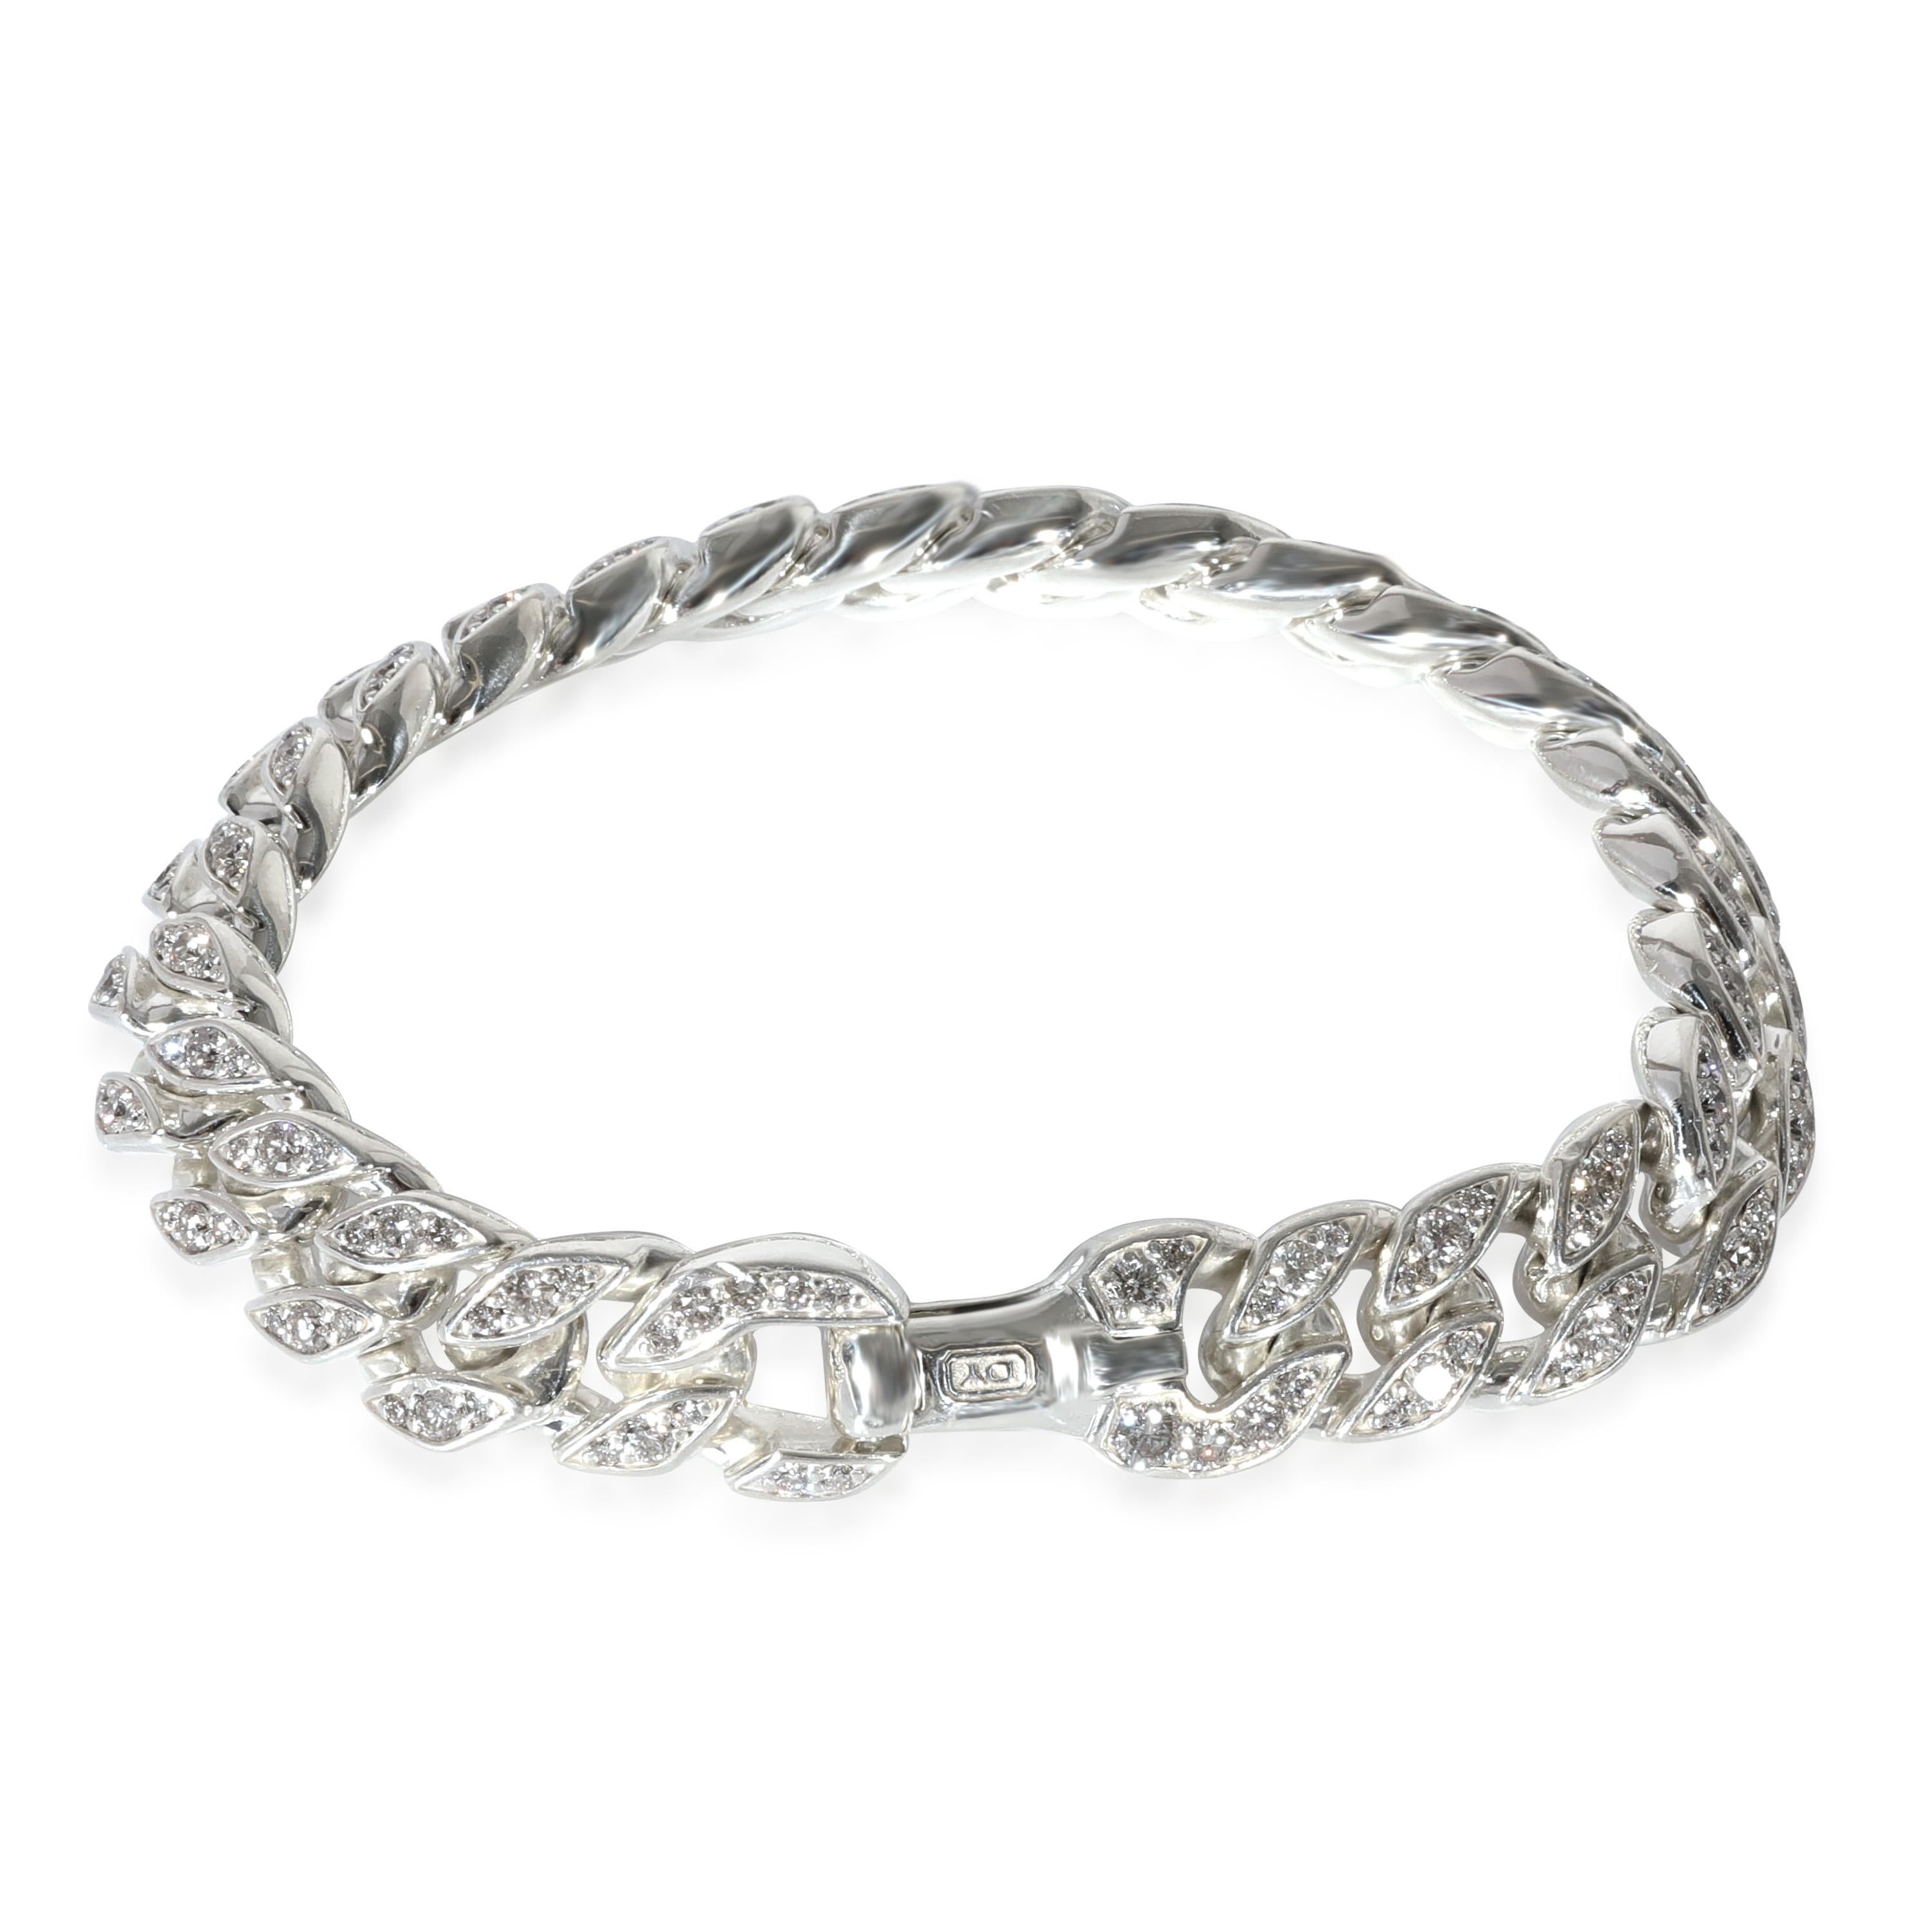 David Yurman Chain Pave Collection Bracelet in  Sterling Silver 4.85 CTW

PRIMARY DETAILS
SKU: 130890
Listing Title: David Yurman Chain Pave Collection Bracelet in  Sterling Silver 4.85 CTW
Condition Description: Retails for 10900 USD. In excellent